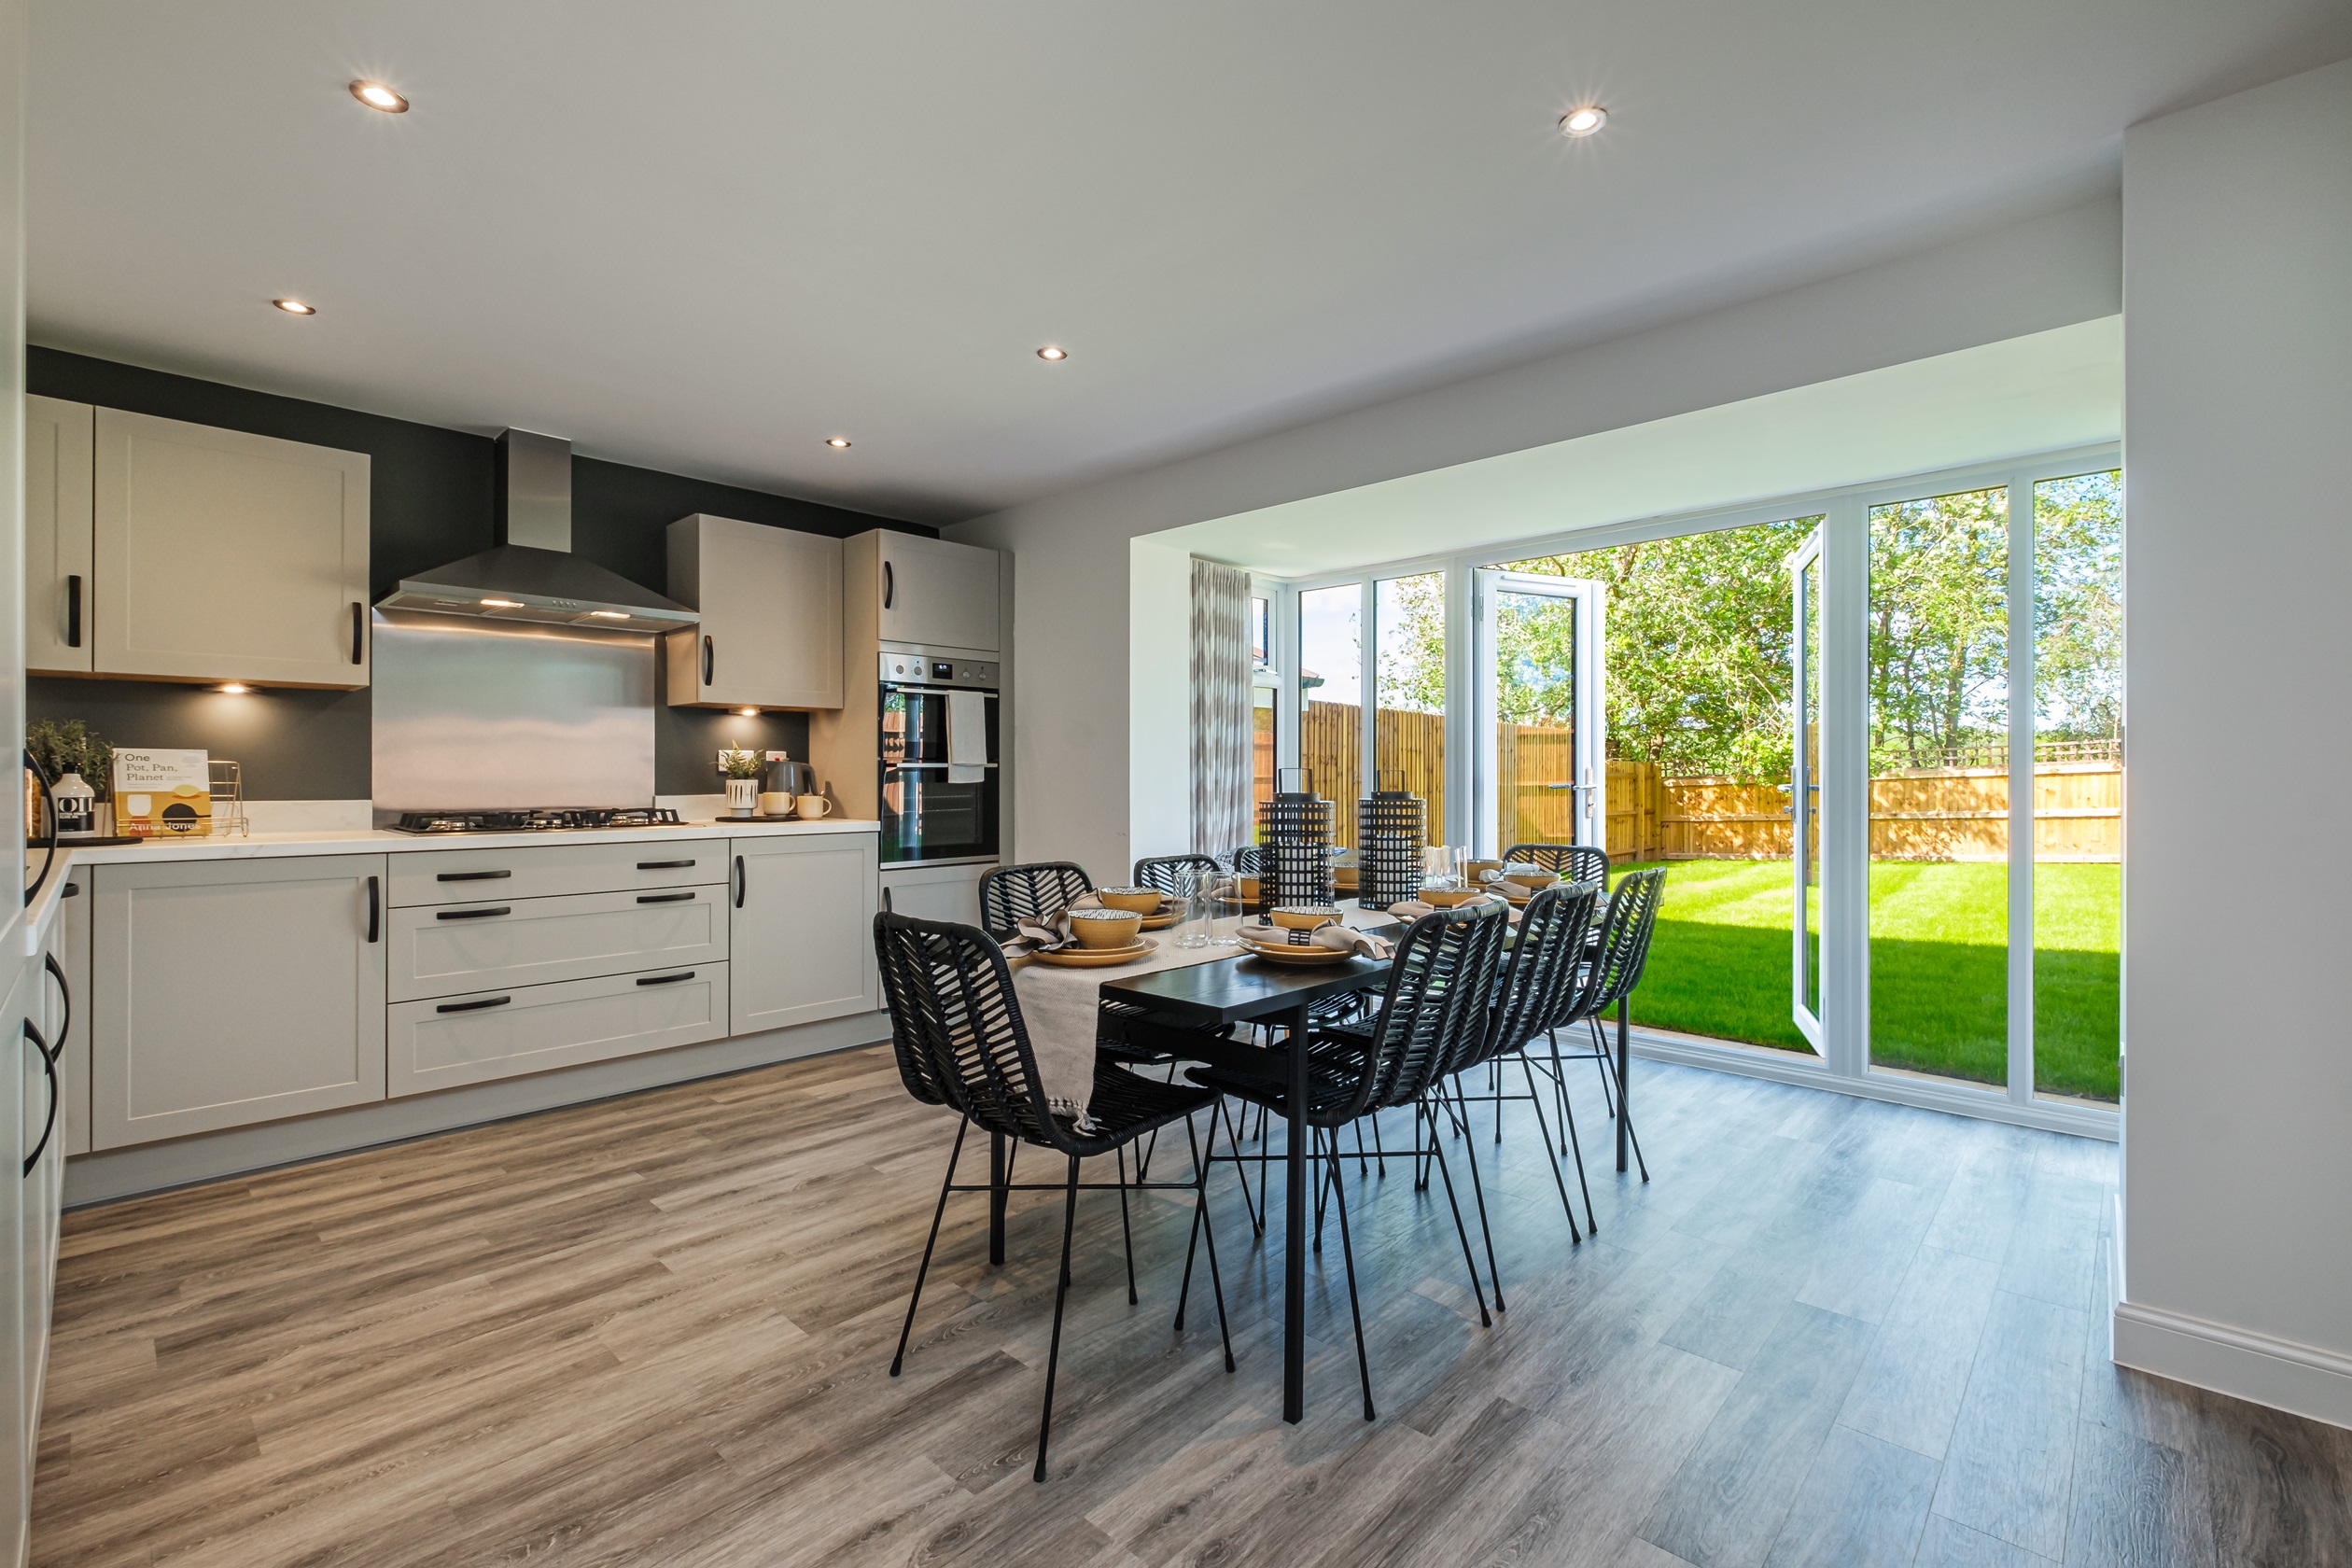 Property 2 of 9. Kitchen Diner With French Doors In An Exeter Home